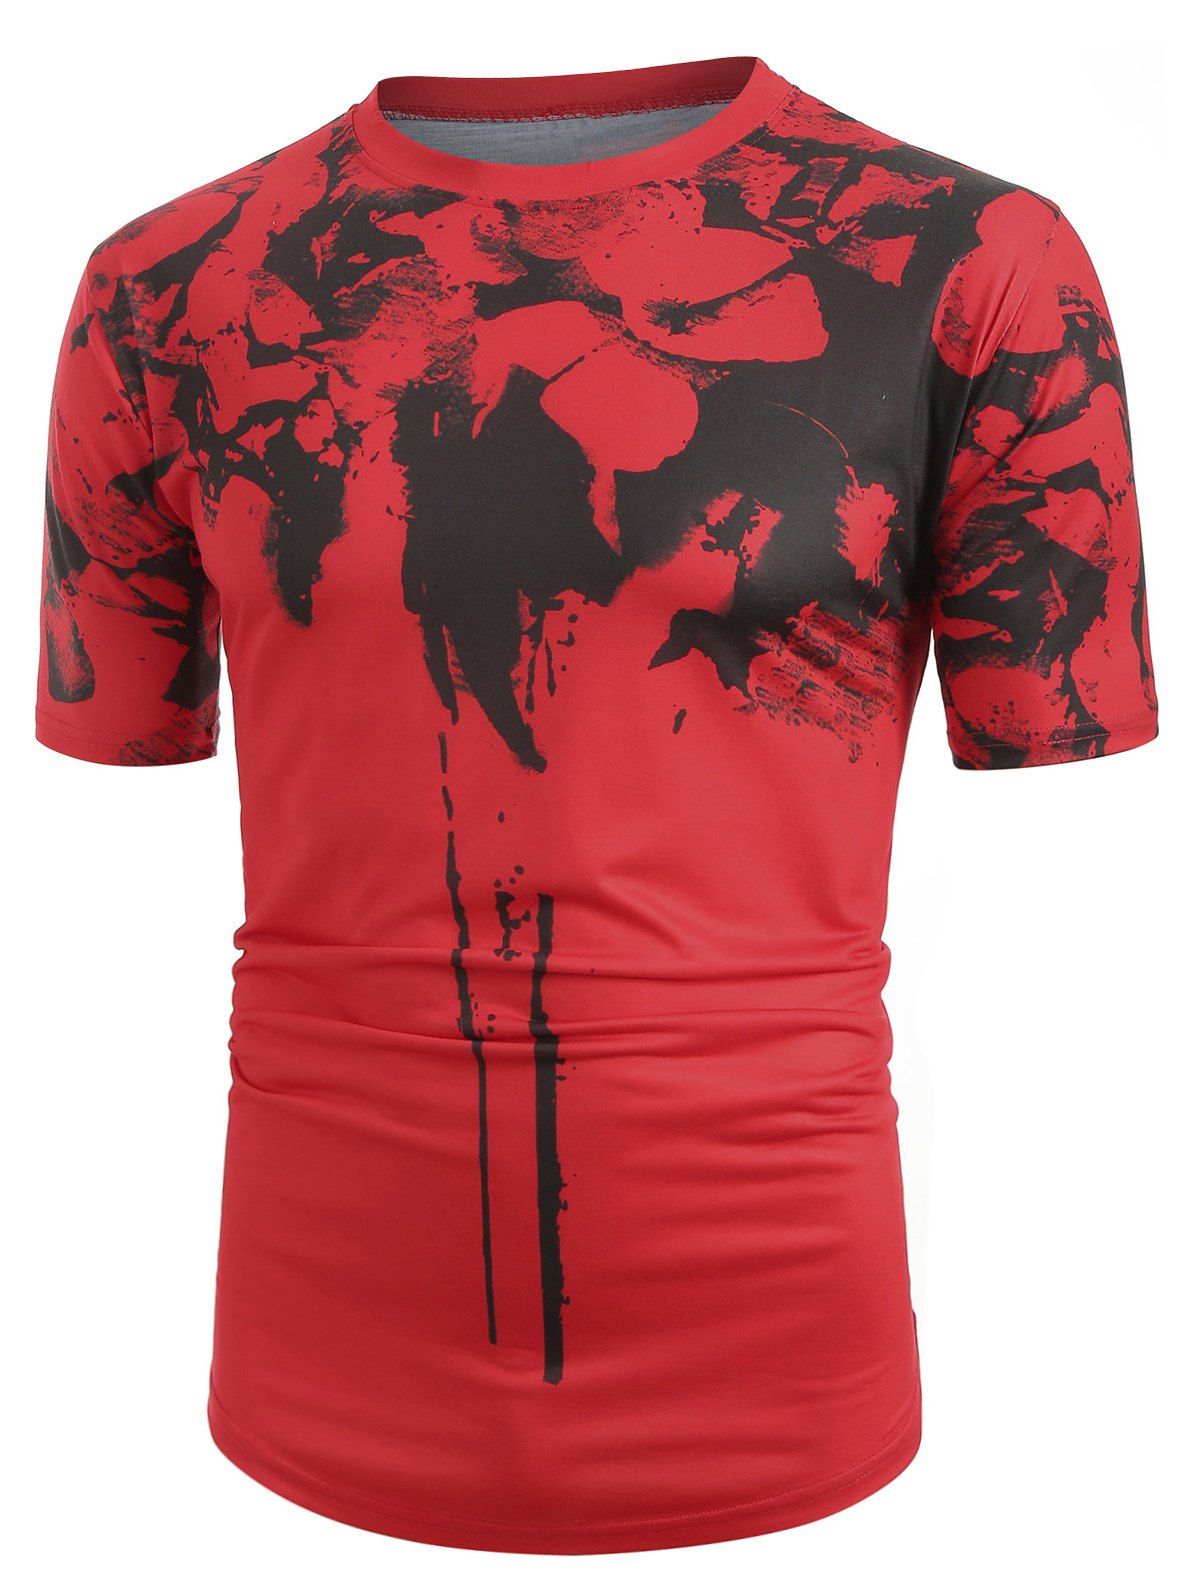 [41% OFF] 2020 Ink Painting Splatter Print Short Sleeves T-shirt In RED ...